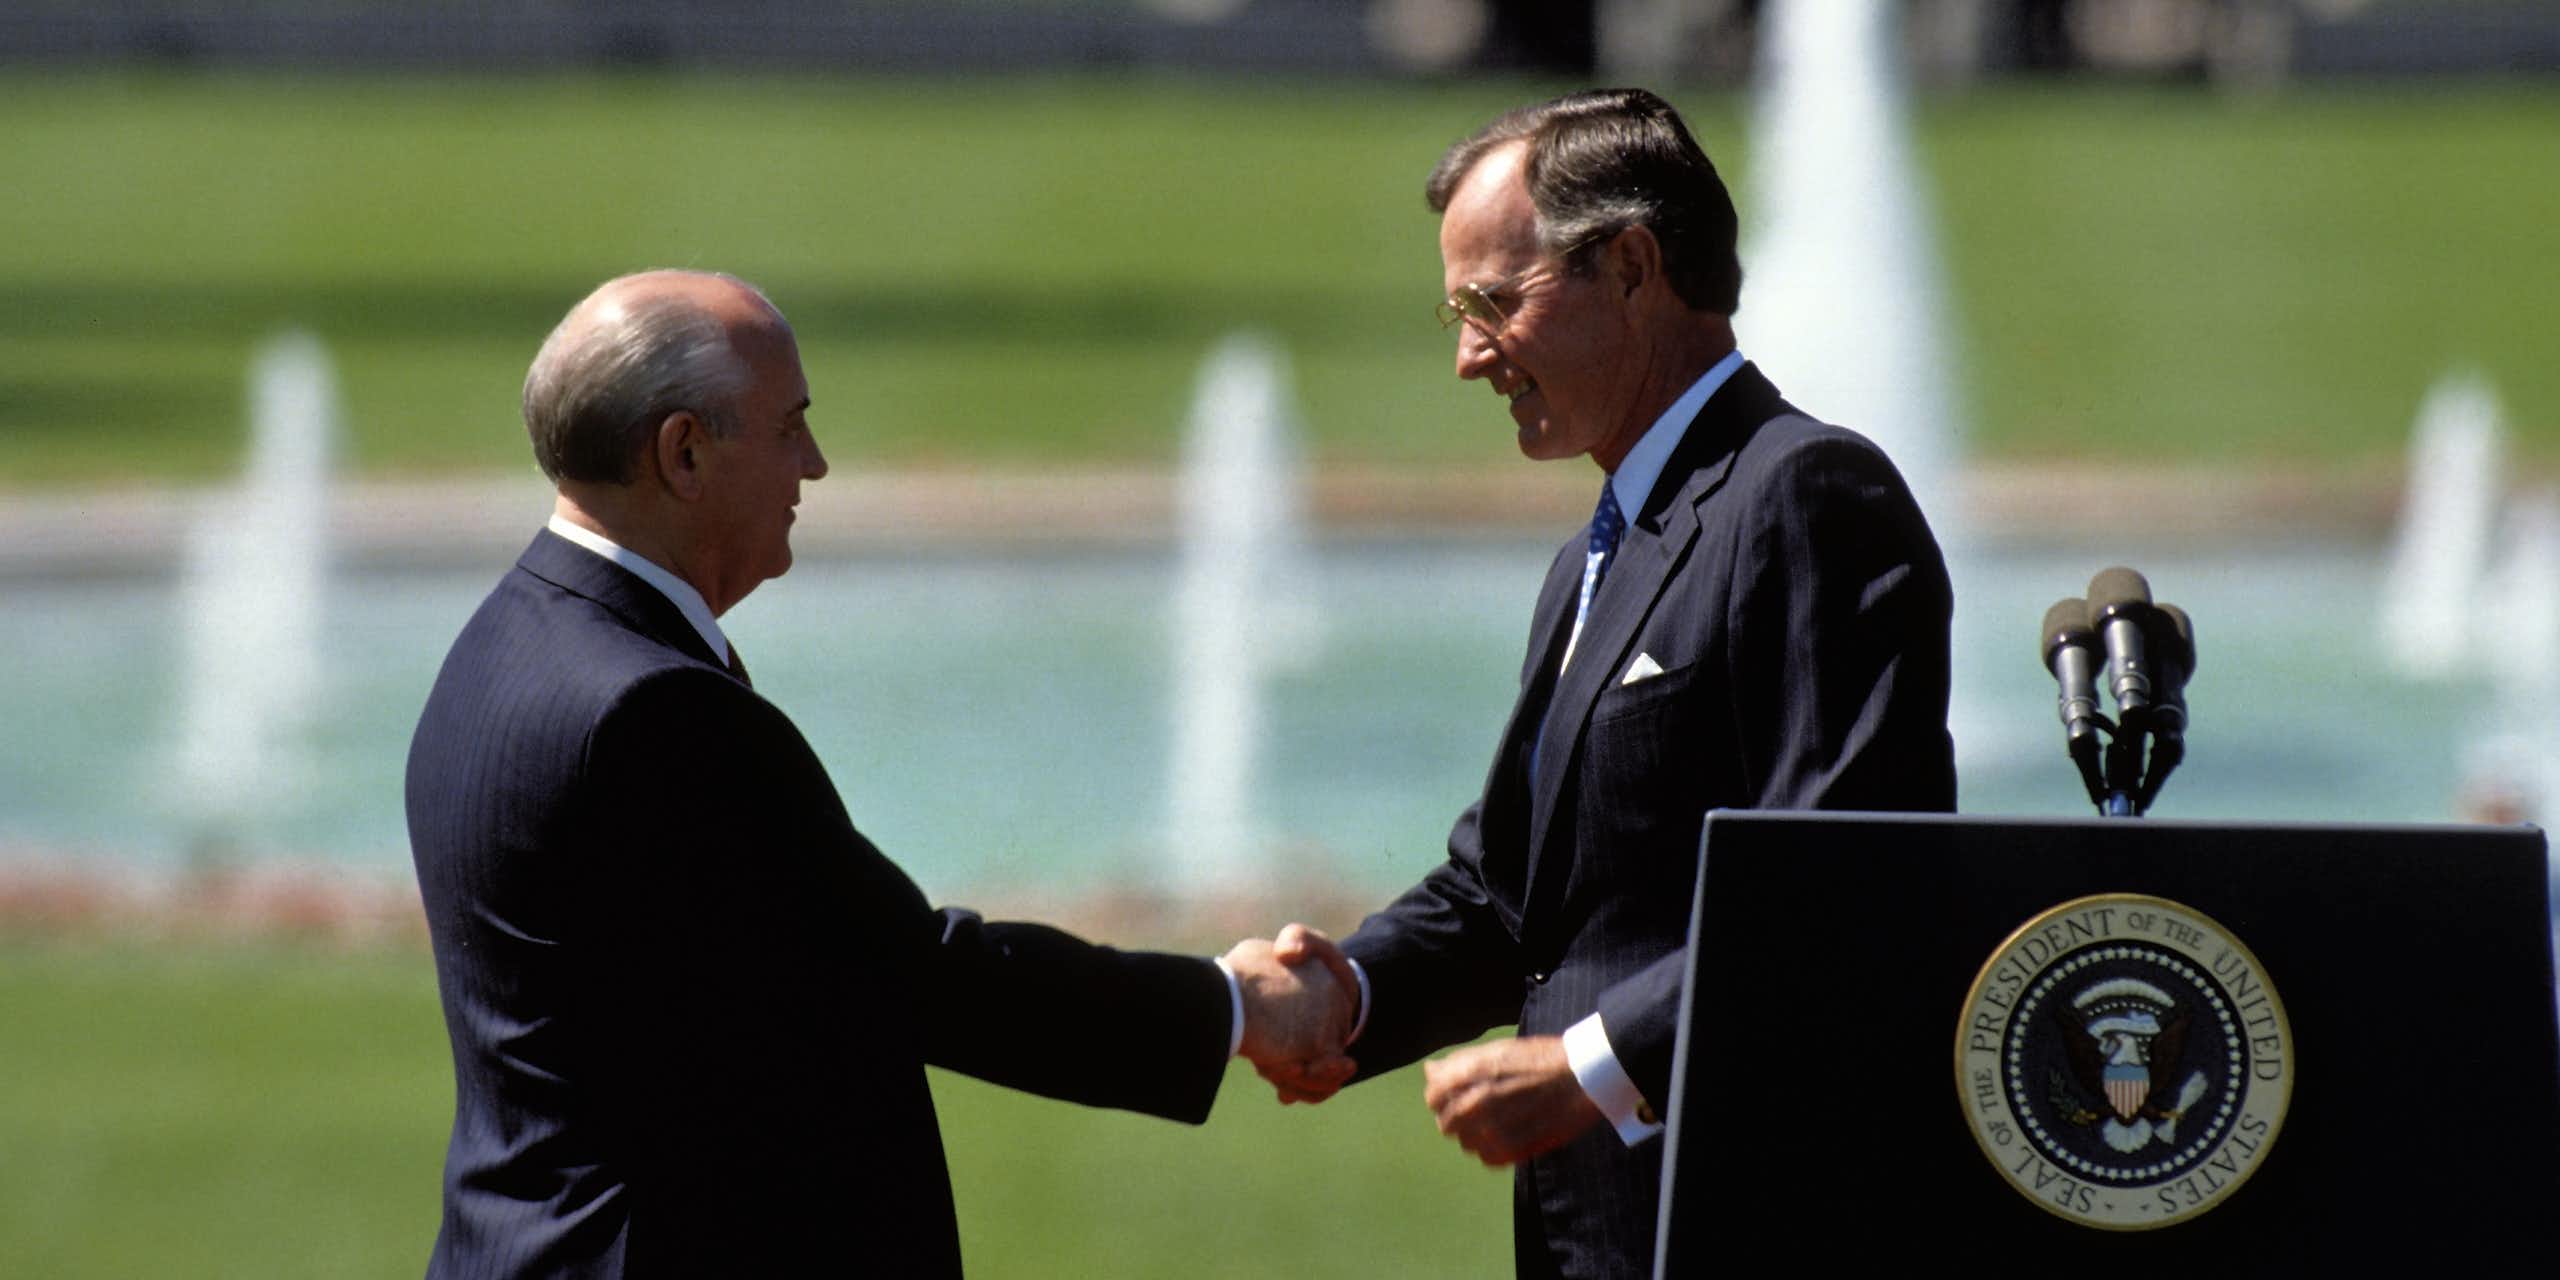 Soviet leader, Michail Gorbachev, and US president, George HW Bush, shake hands on the SHite House lawn, May 1990.